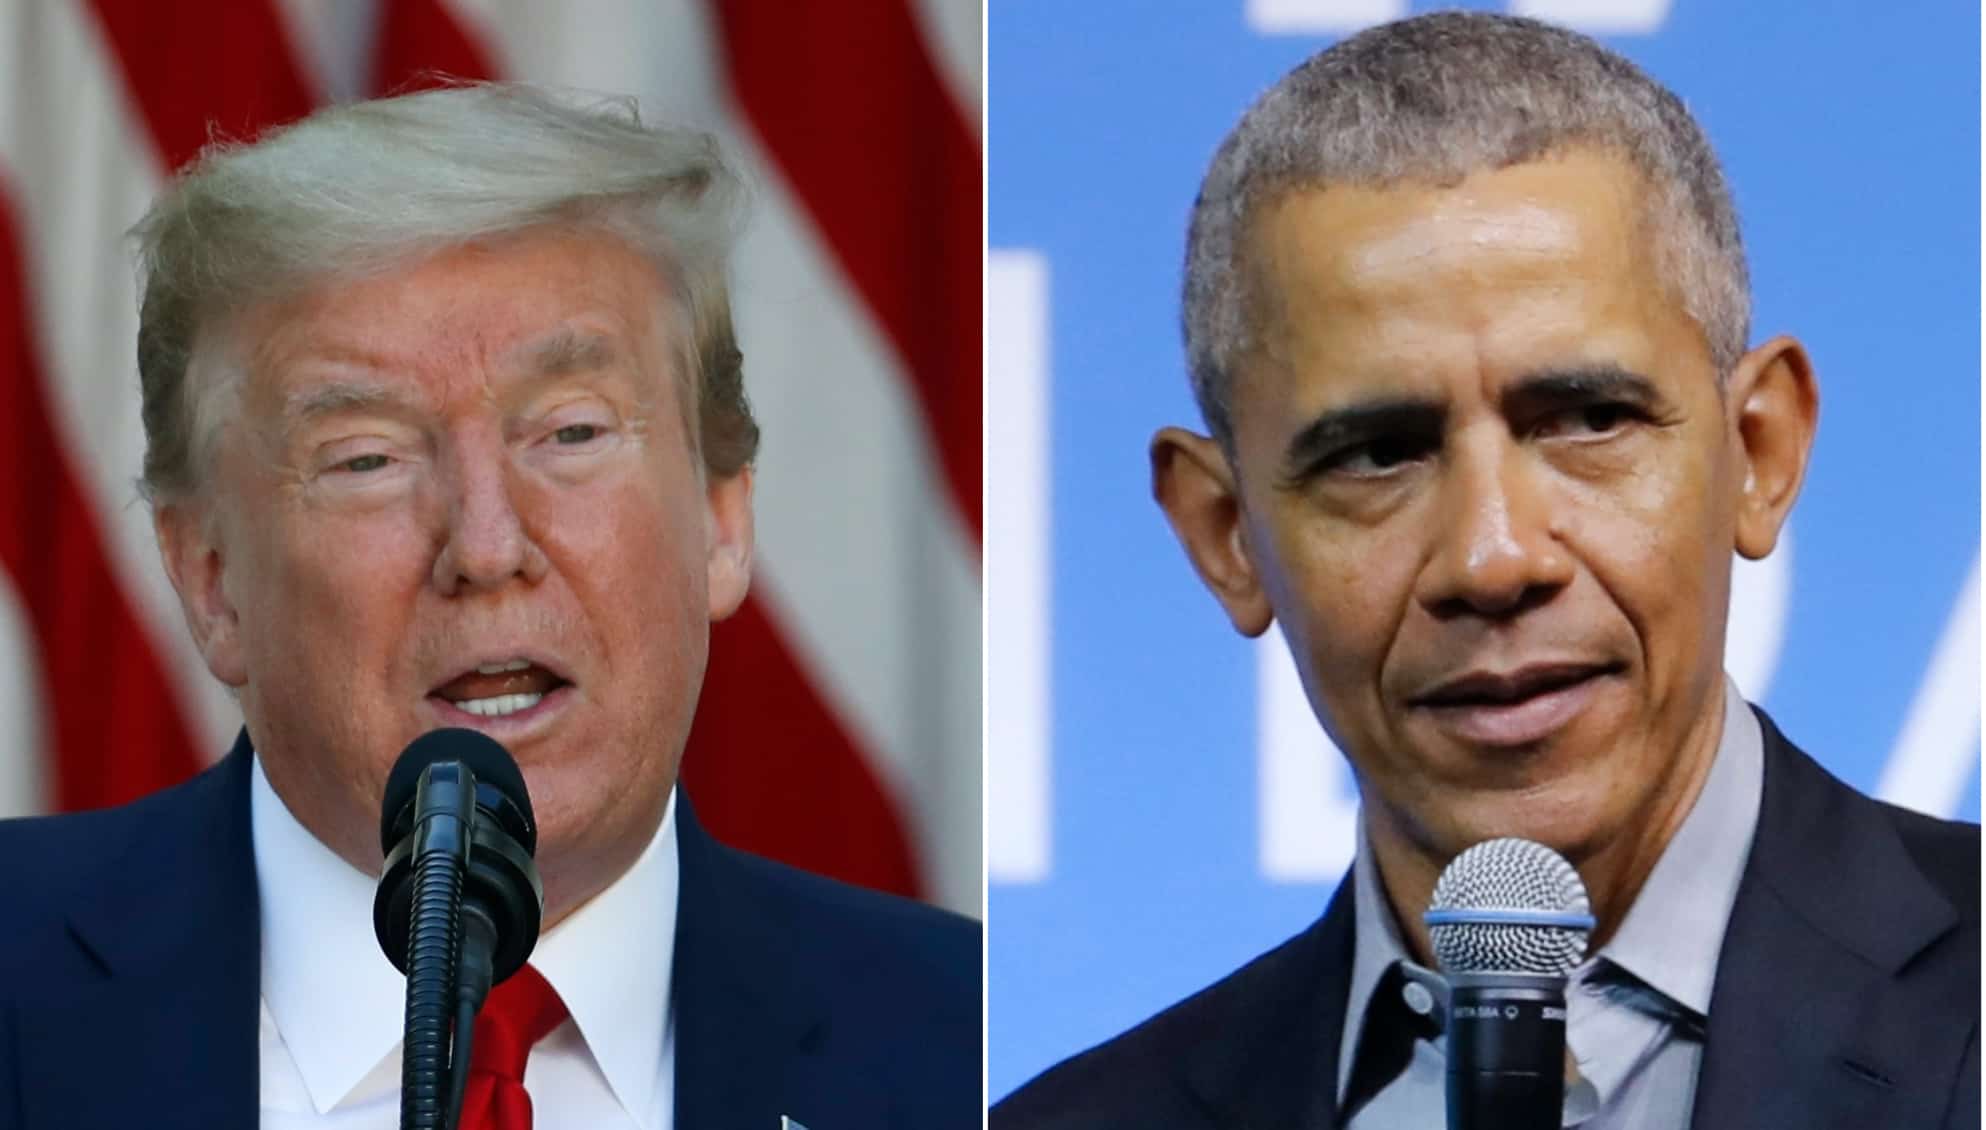 The amount Obama paid in federal taxes in first year of office compared to Trump is astonishing